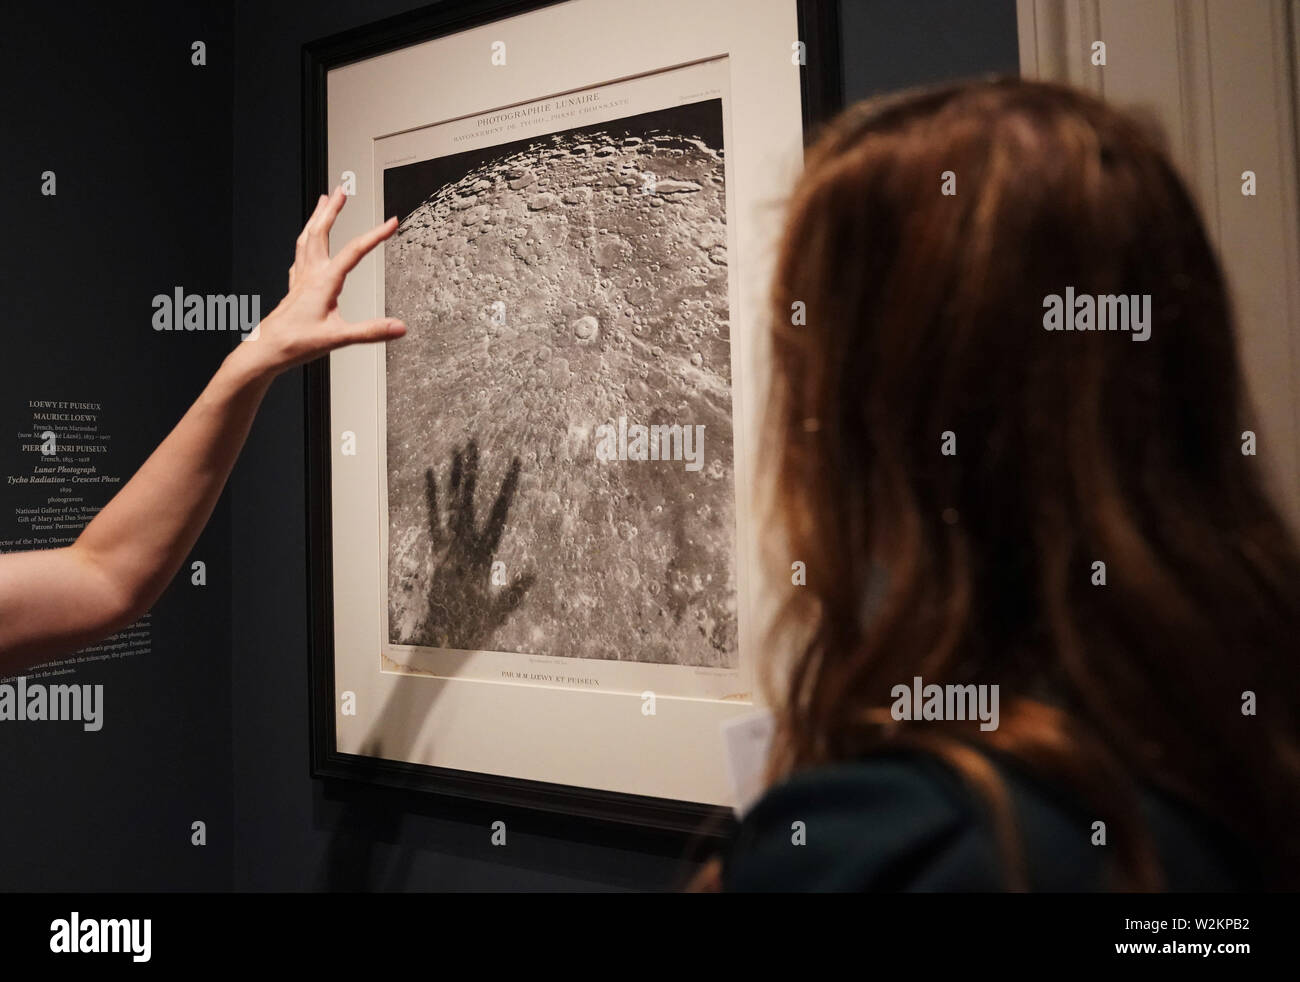 Washington, USA. 9th July, 2019. Visitors view a lunar photograph taken in 1899 during a preview of 'By the Light of the Silvery Moon: A Century of Lunar Photographs' at the National Gallery of Art in Washington, DC, the United States, on July 9, 2019. Some 50 works including a selection of photographs will be displayed in the exhibition lasting from July 14, 2019 through Jan. 5, 2020 to mark the 50th anniversary of the Apollo 11 moon landing. Credit: Liu Jie/Xinhua/Alamy Live News Stock Photo